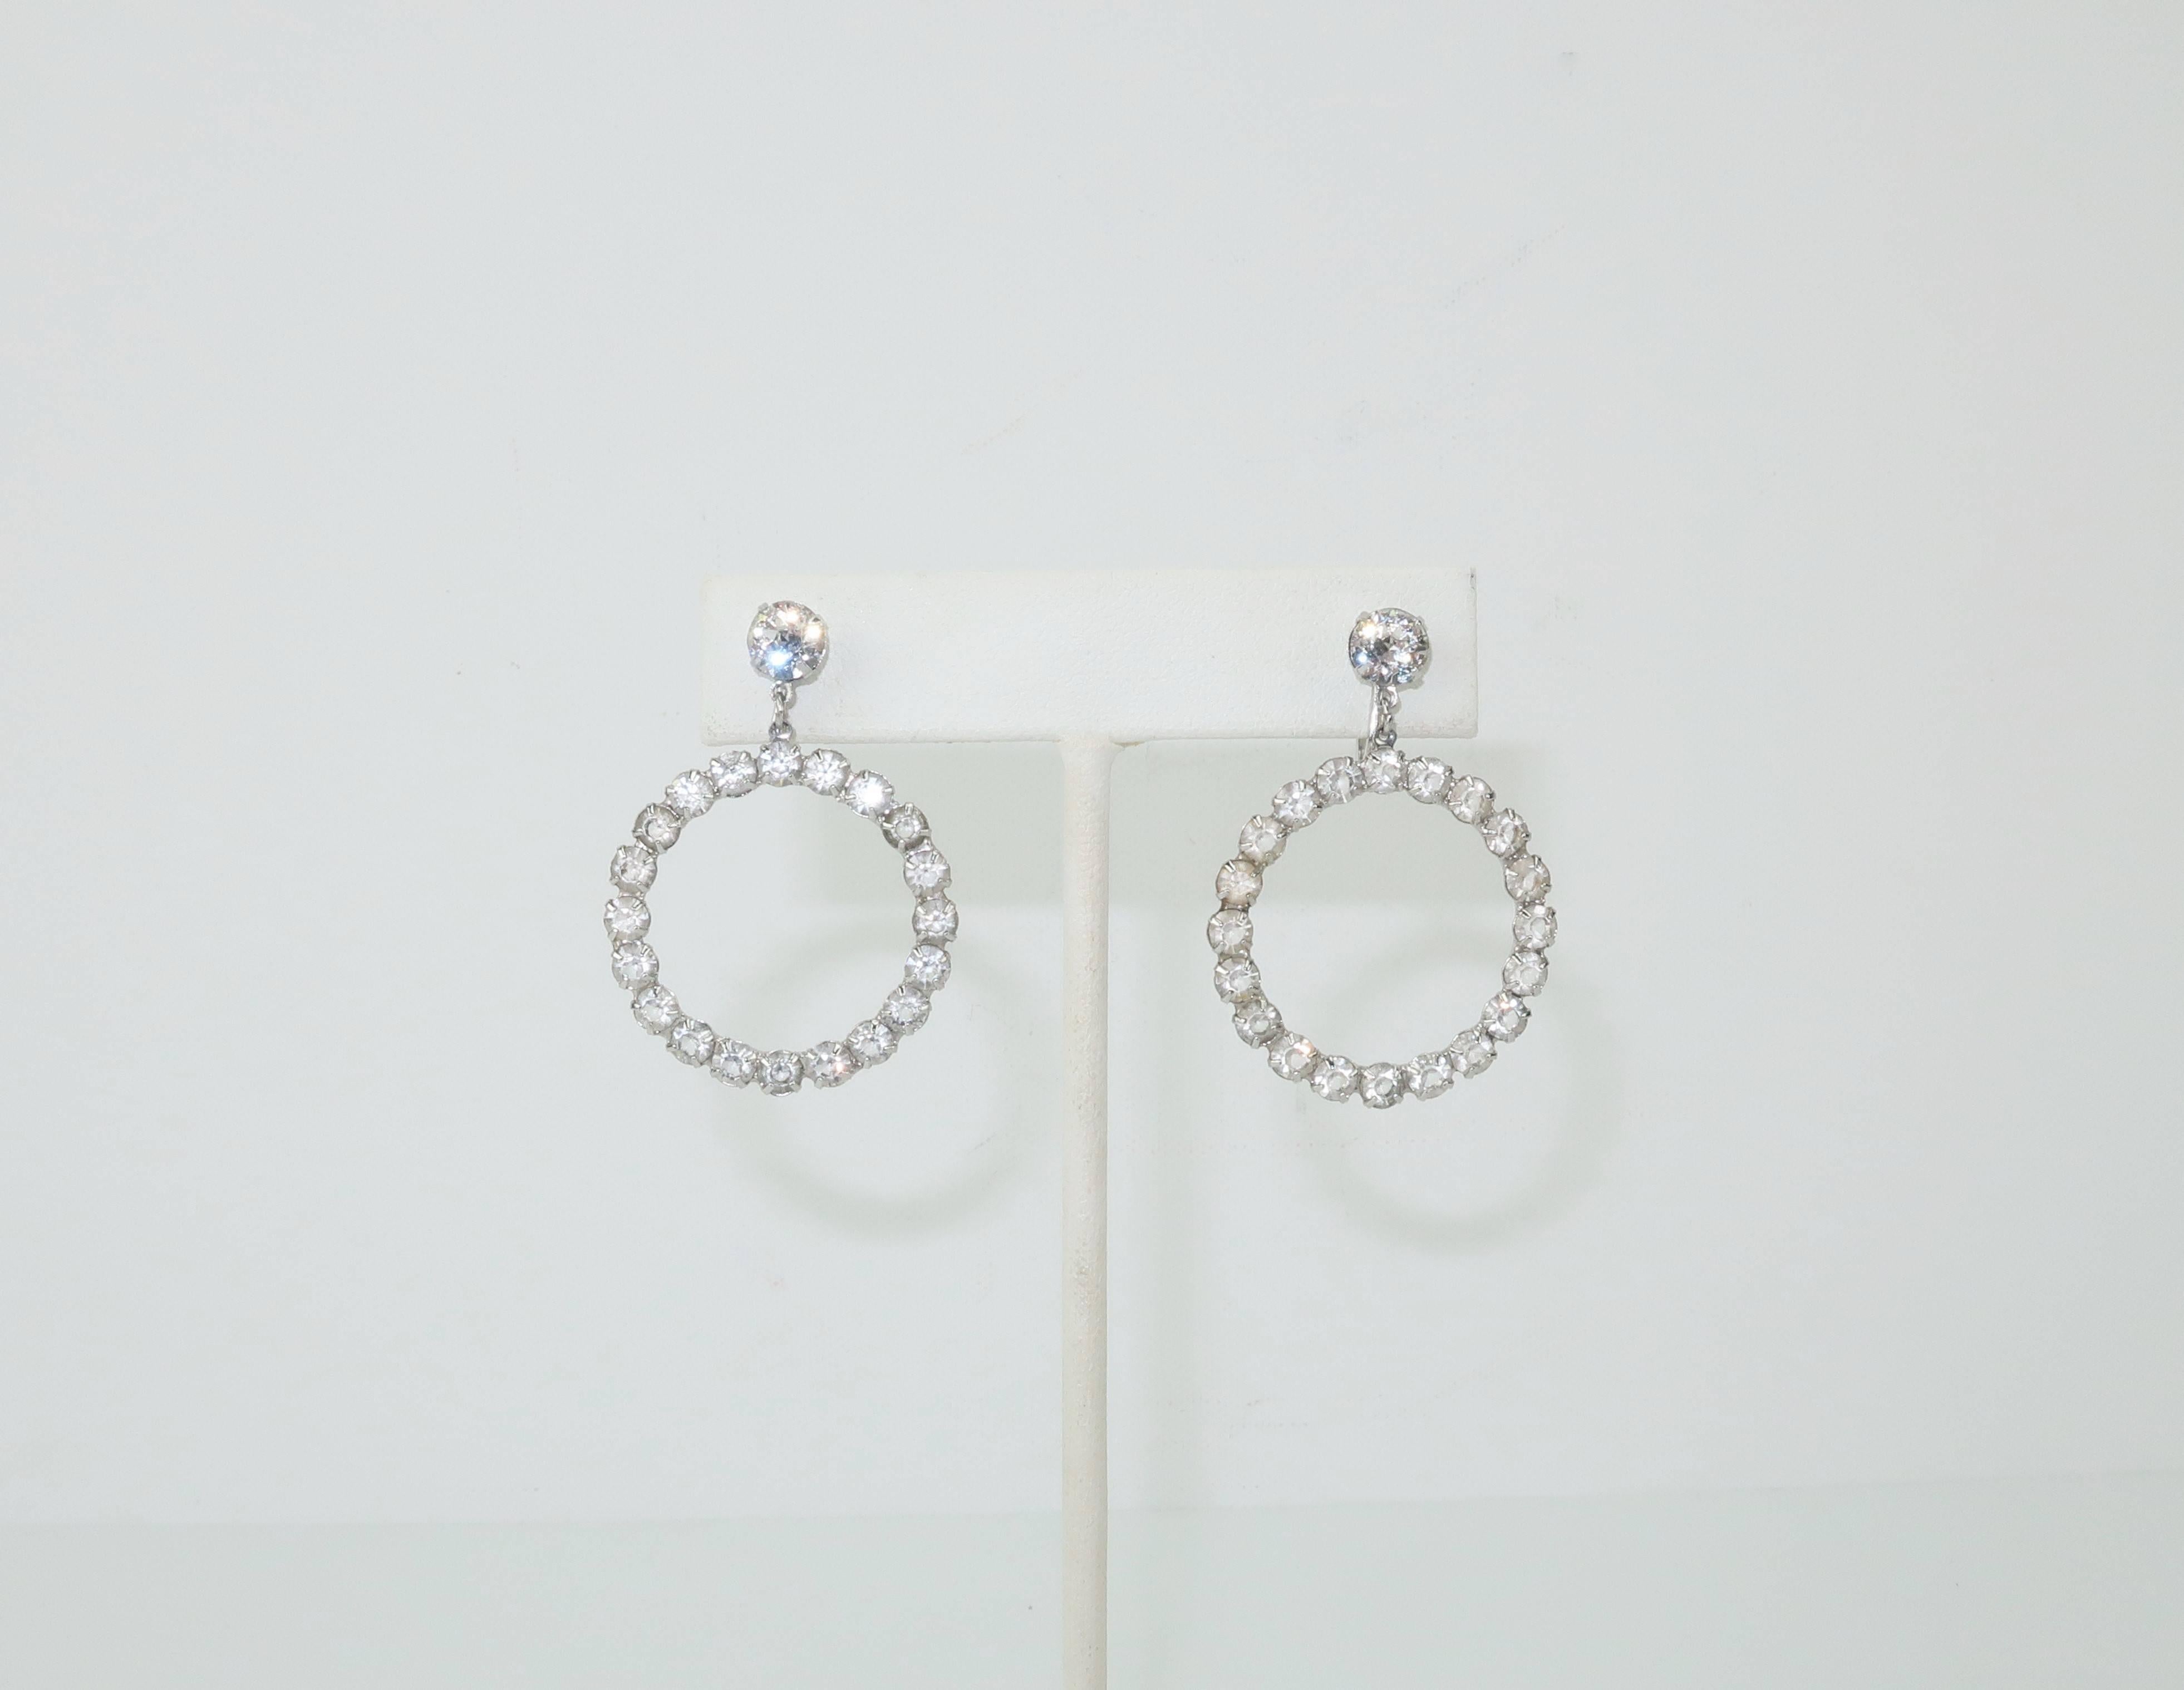 Add vintage glamour to your look with these 1950's sterling silver hoop earrings fully embellished with sparkling crystal rhinestones.  The articulated dangle design provides movement giving the sparklers a chance to catch the light.  The screw back